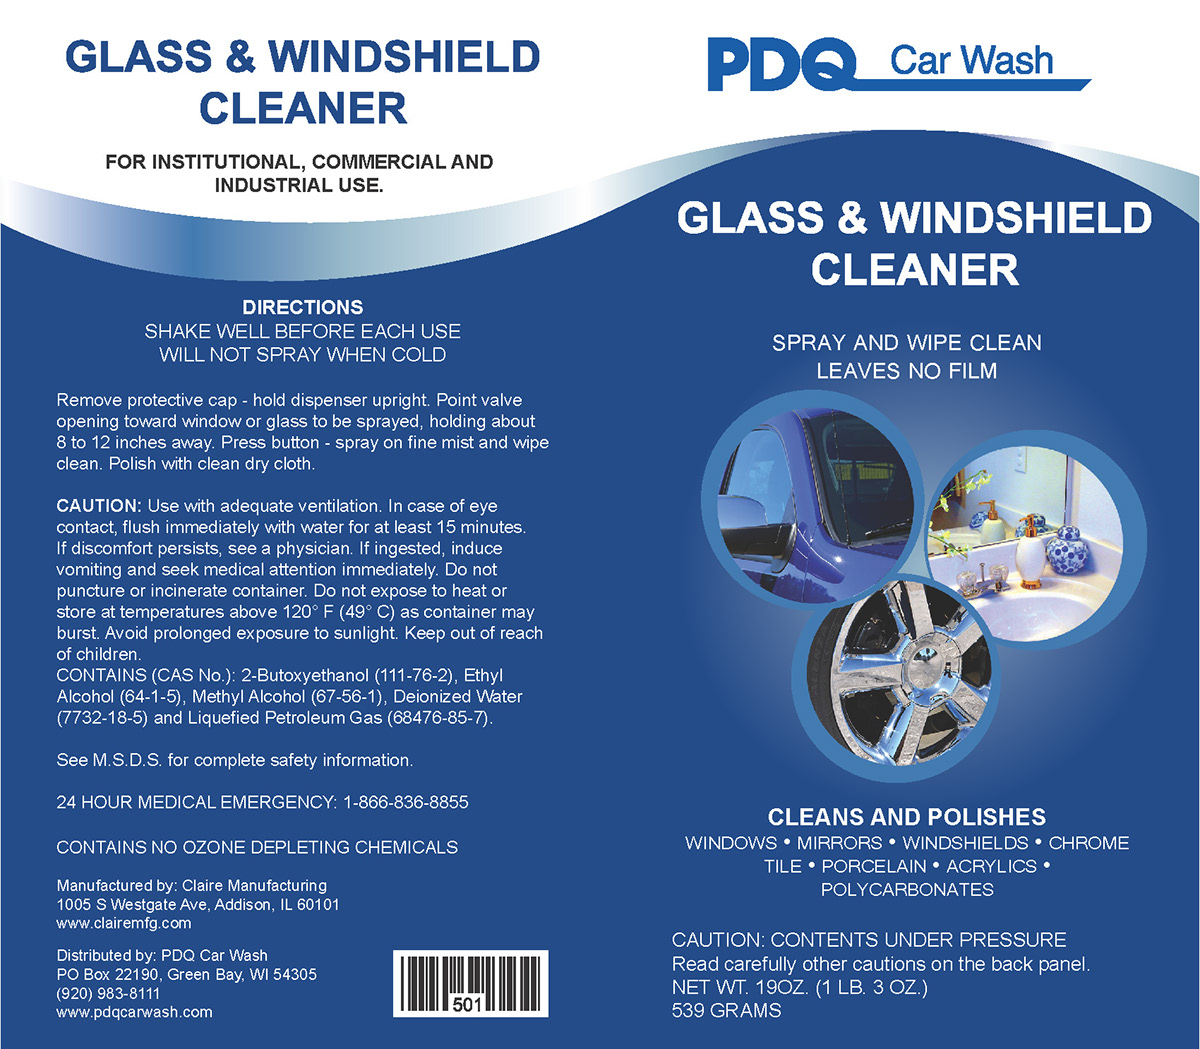 pdq cleaning package can spray cleaner